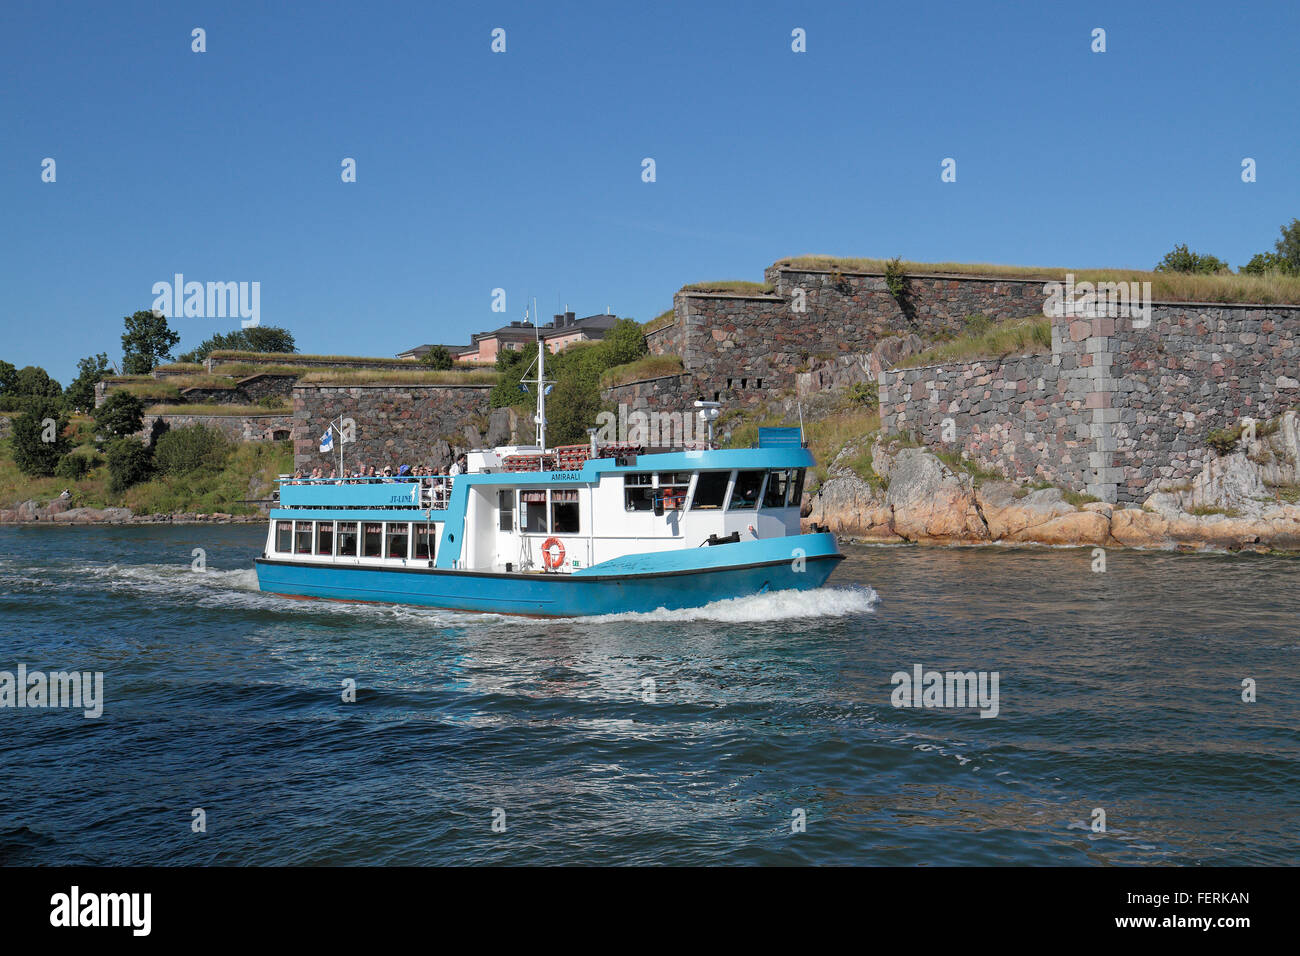 A JT-Line waterbus (between Kauppatori and Suomenlinna) on the fortress island of Suomenlinna, Helsinki, Finland. Stock Photo